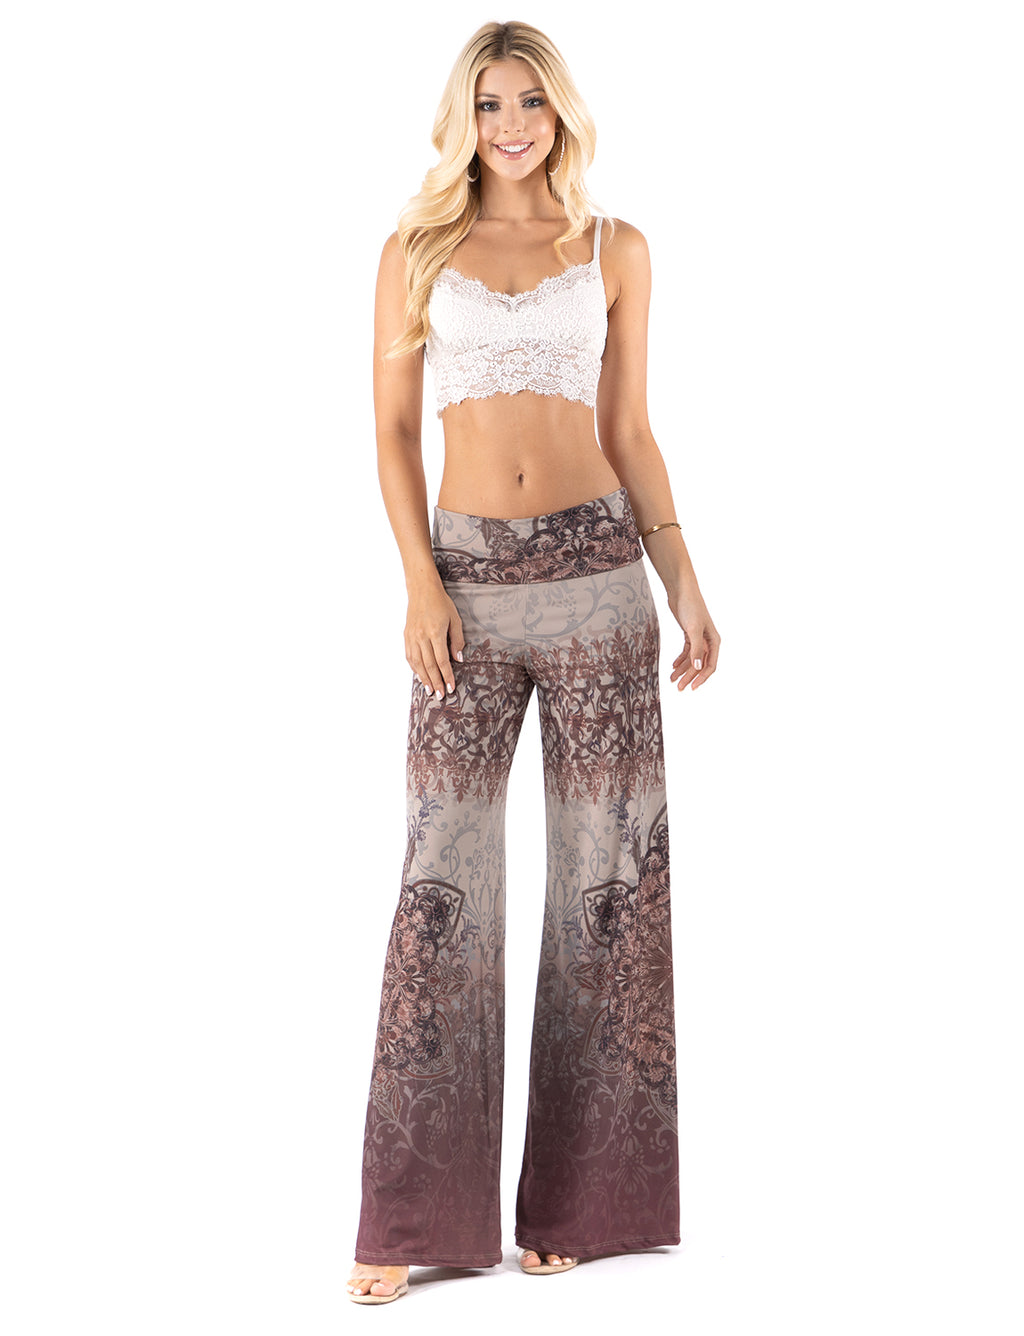 Beautiful woman wearing this amazing Brown Cream Floral High waist palazzo pants featuring pockets, wide legs, and a comfortable stretchy fabric